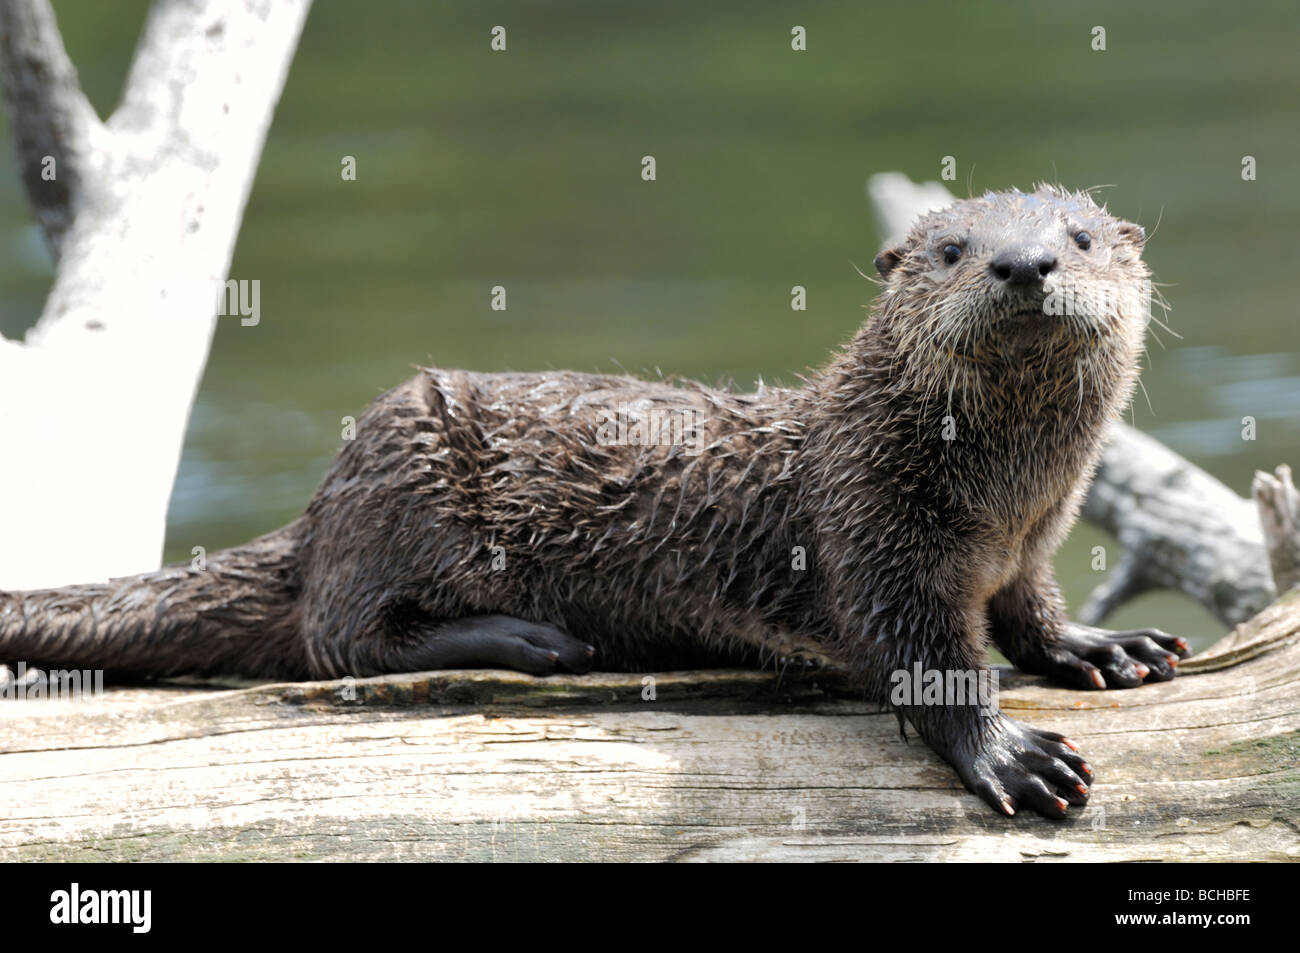 Stock photo of a river otter pup sitting on a log in a lake, Yellowstone National Park, Montana, 2009. Stock Photo